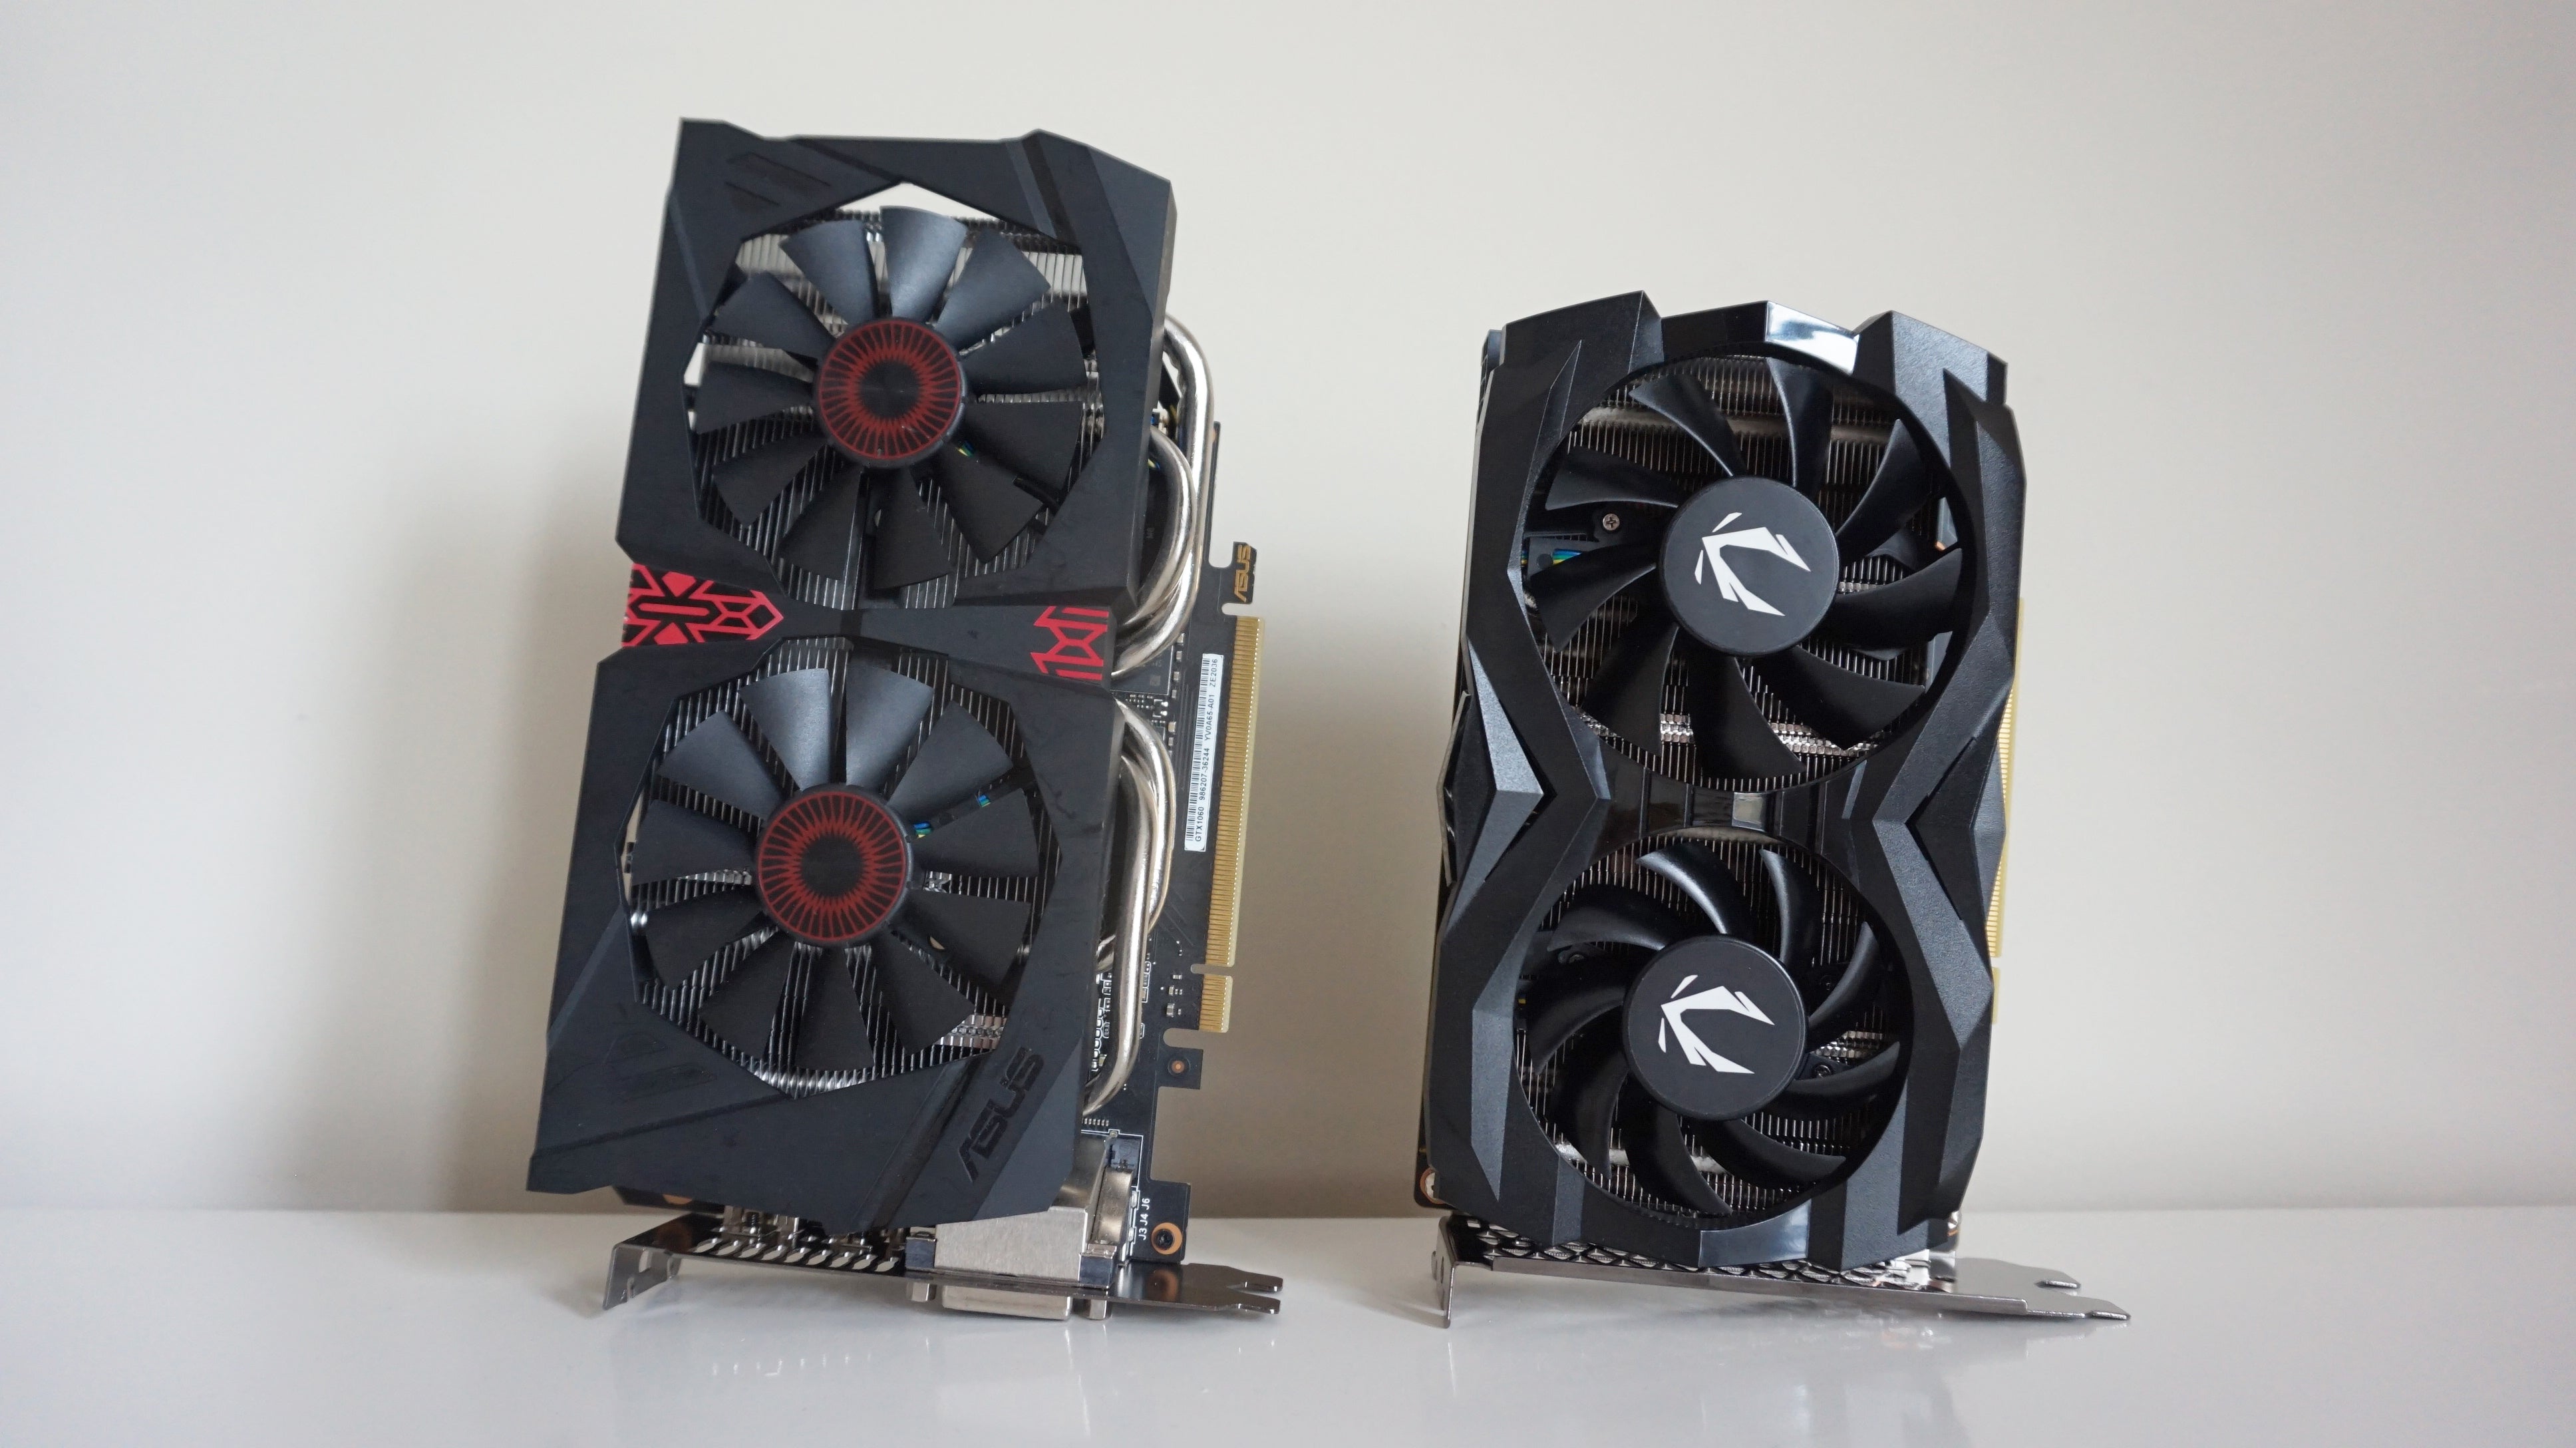 Nvidia GTX 1060 vs 1660 Super: How much faster is Nvidia's new 